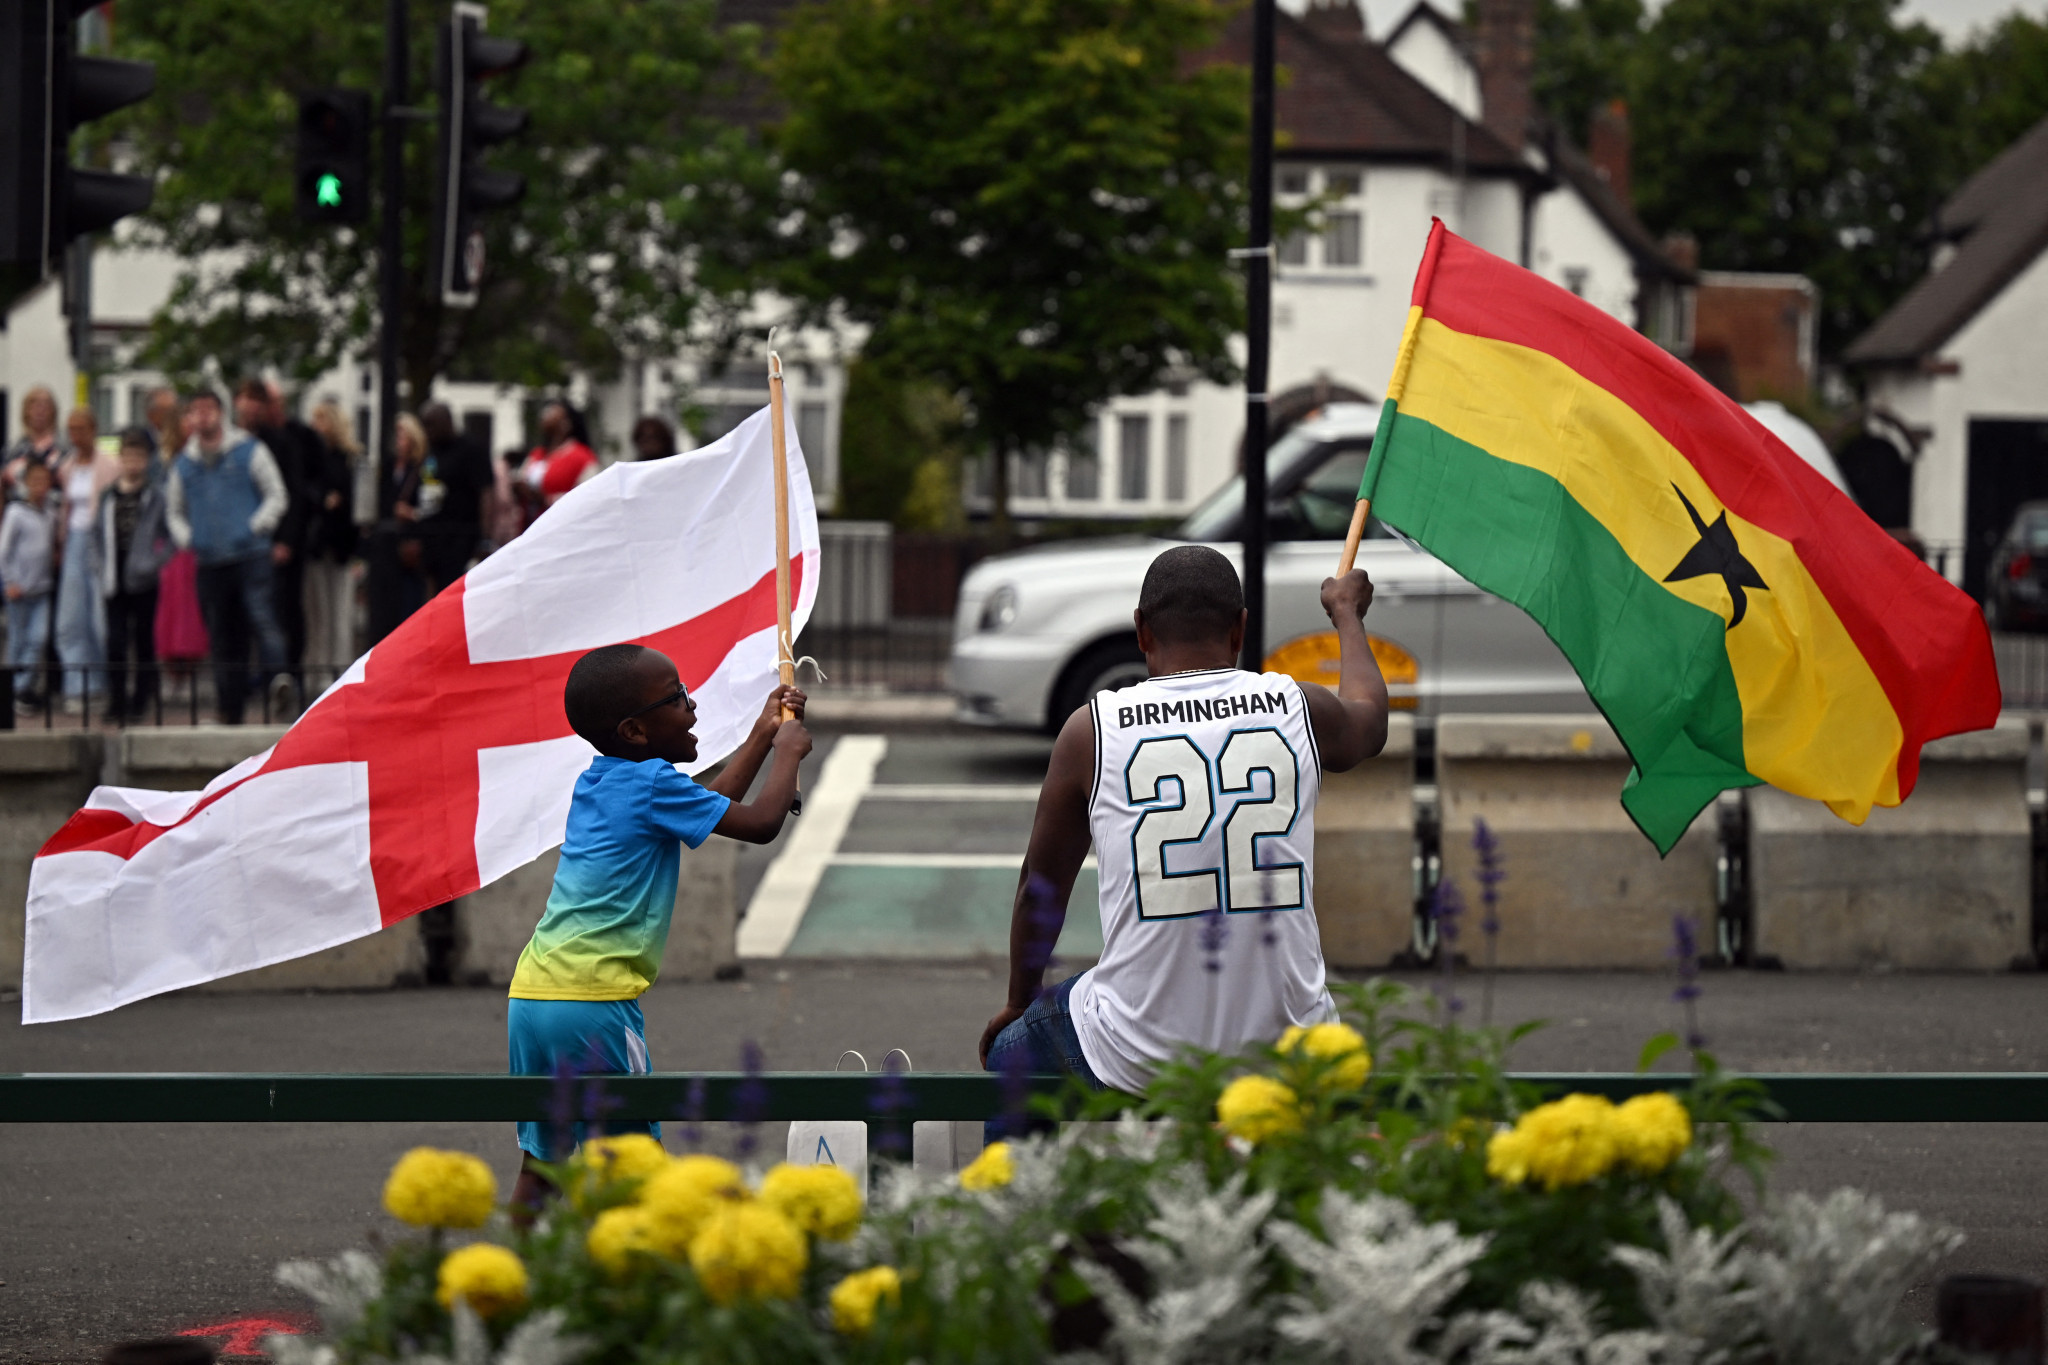 The call between the Accra 2023 Organising Committee and Ghana's High Commissioner to the UK took place during Birmingham 2022 ©Getty Images